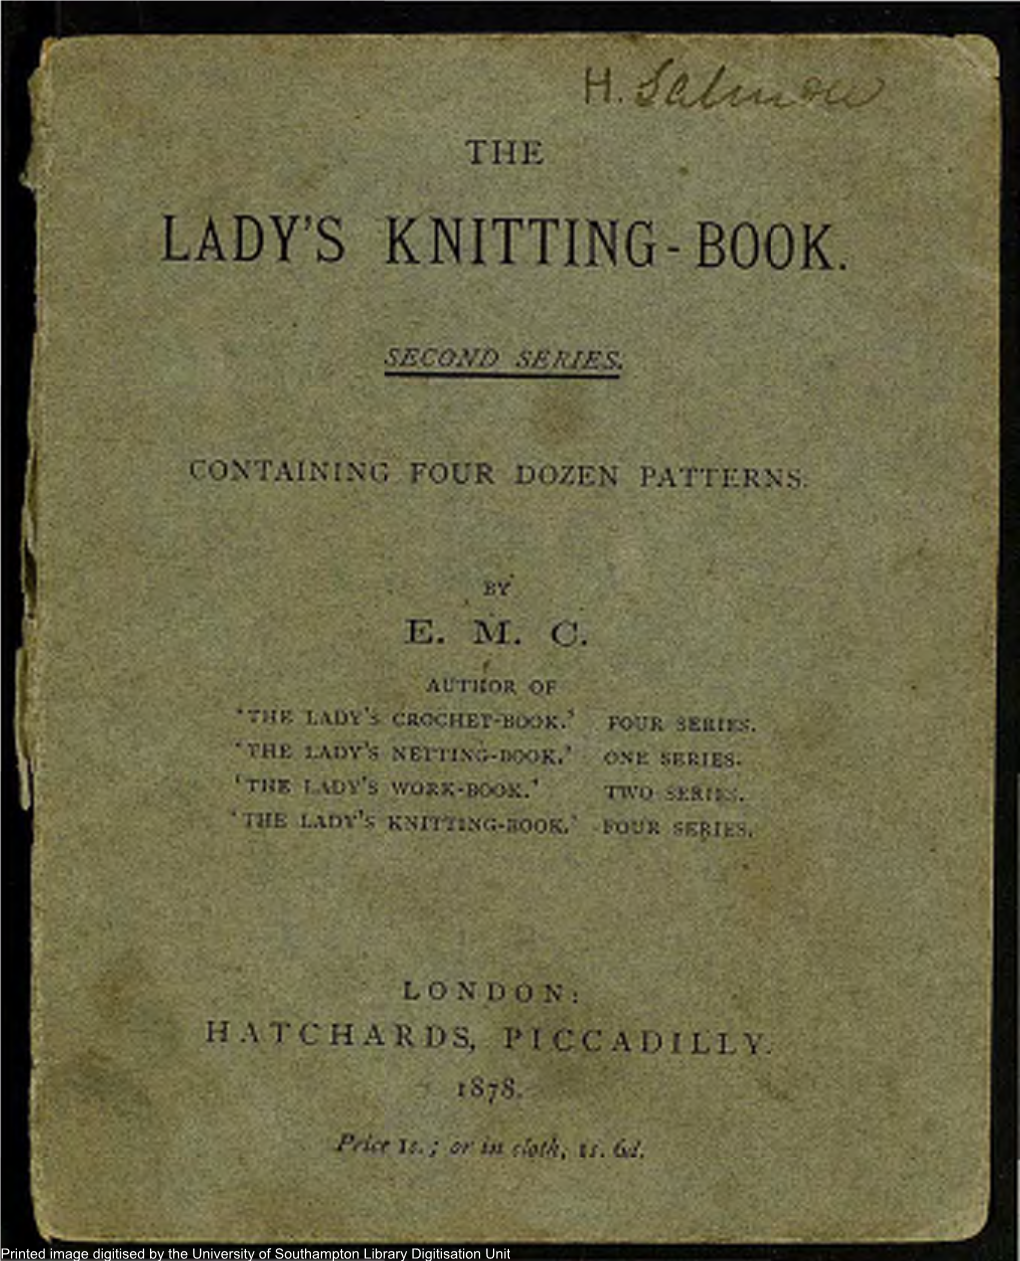 Lady's "Knitting- Book. "